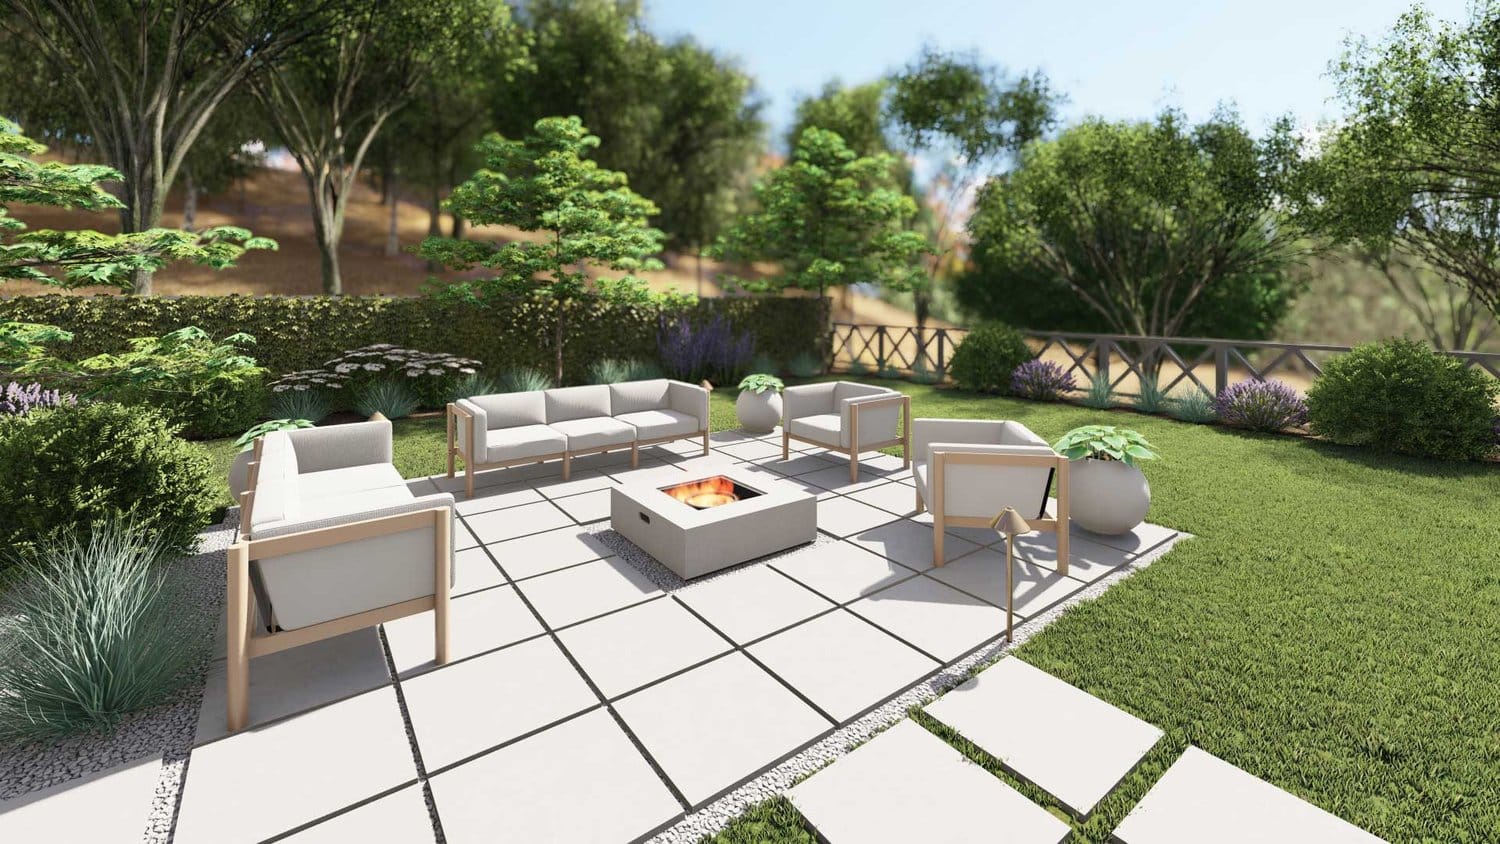 Stamford yard shpowing sitting area with fire pit